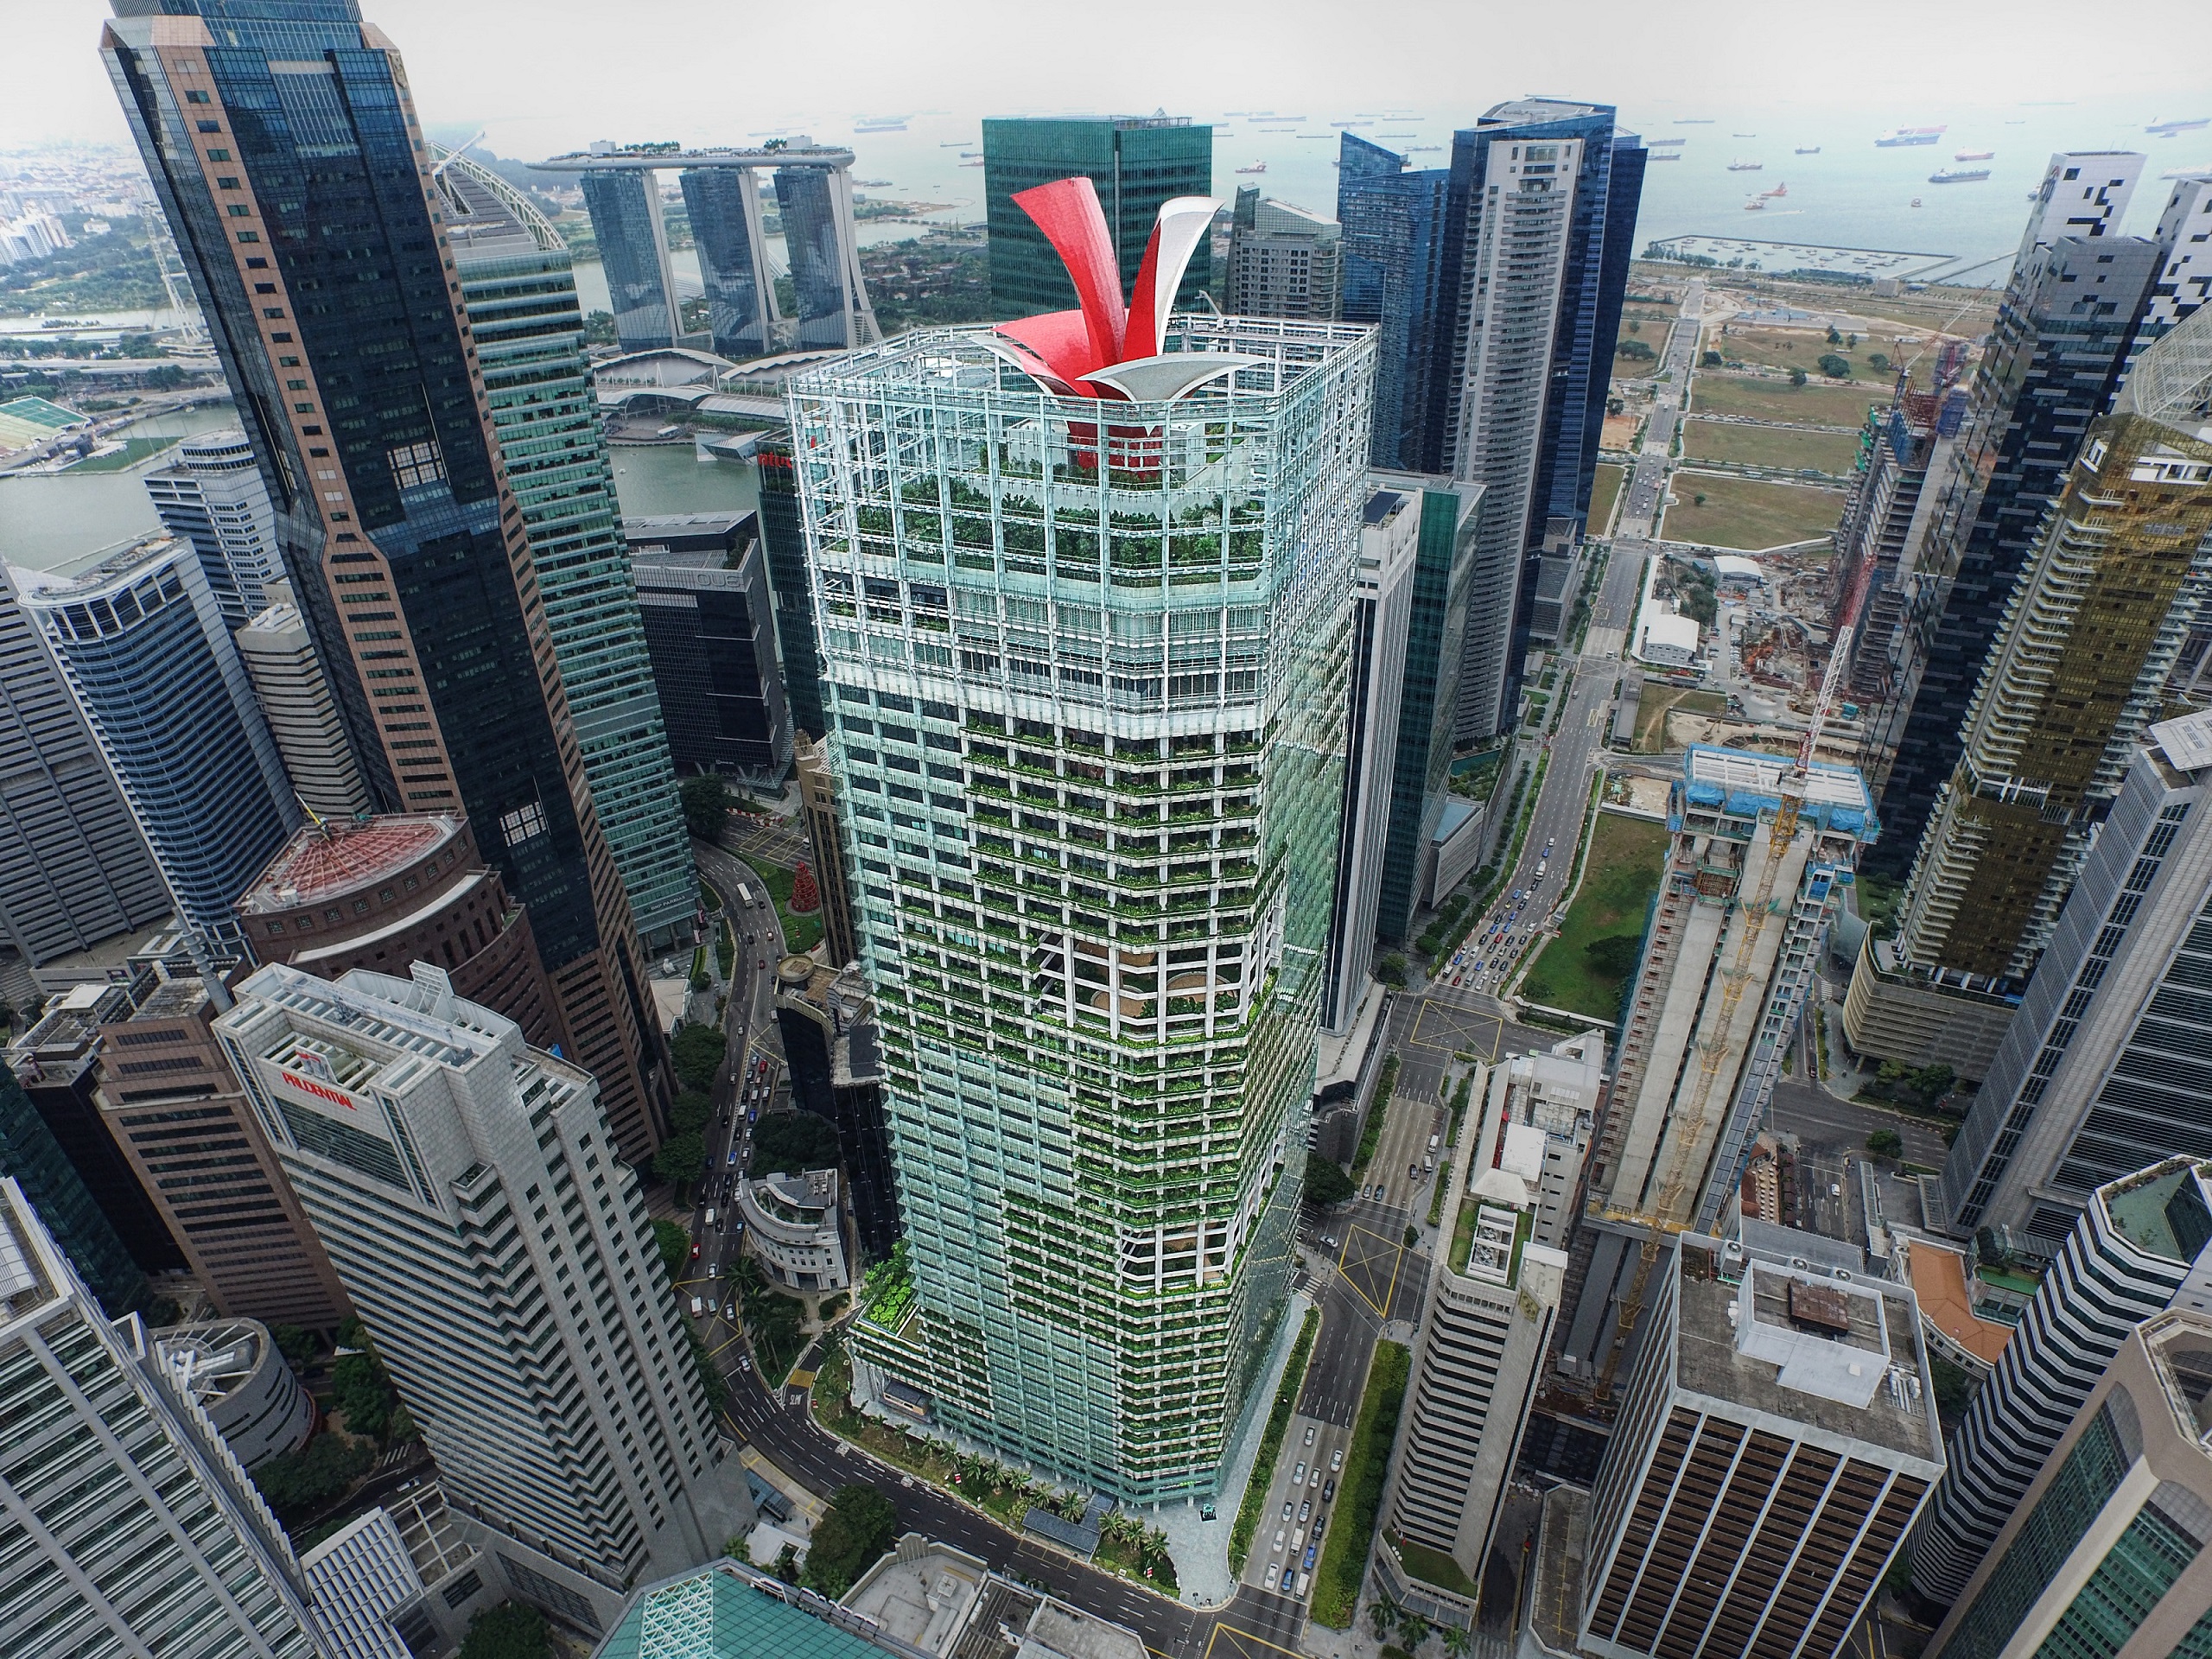 Sustainability is at the core of everything CapitaLand does